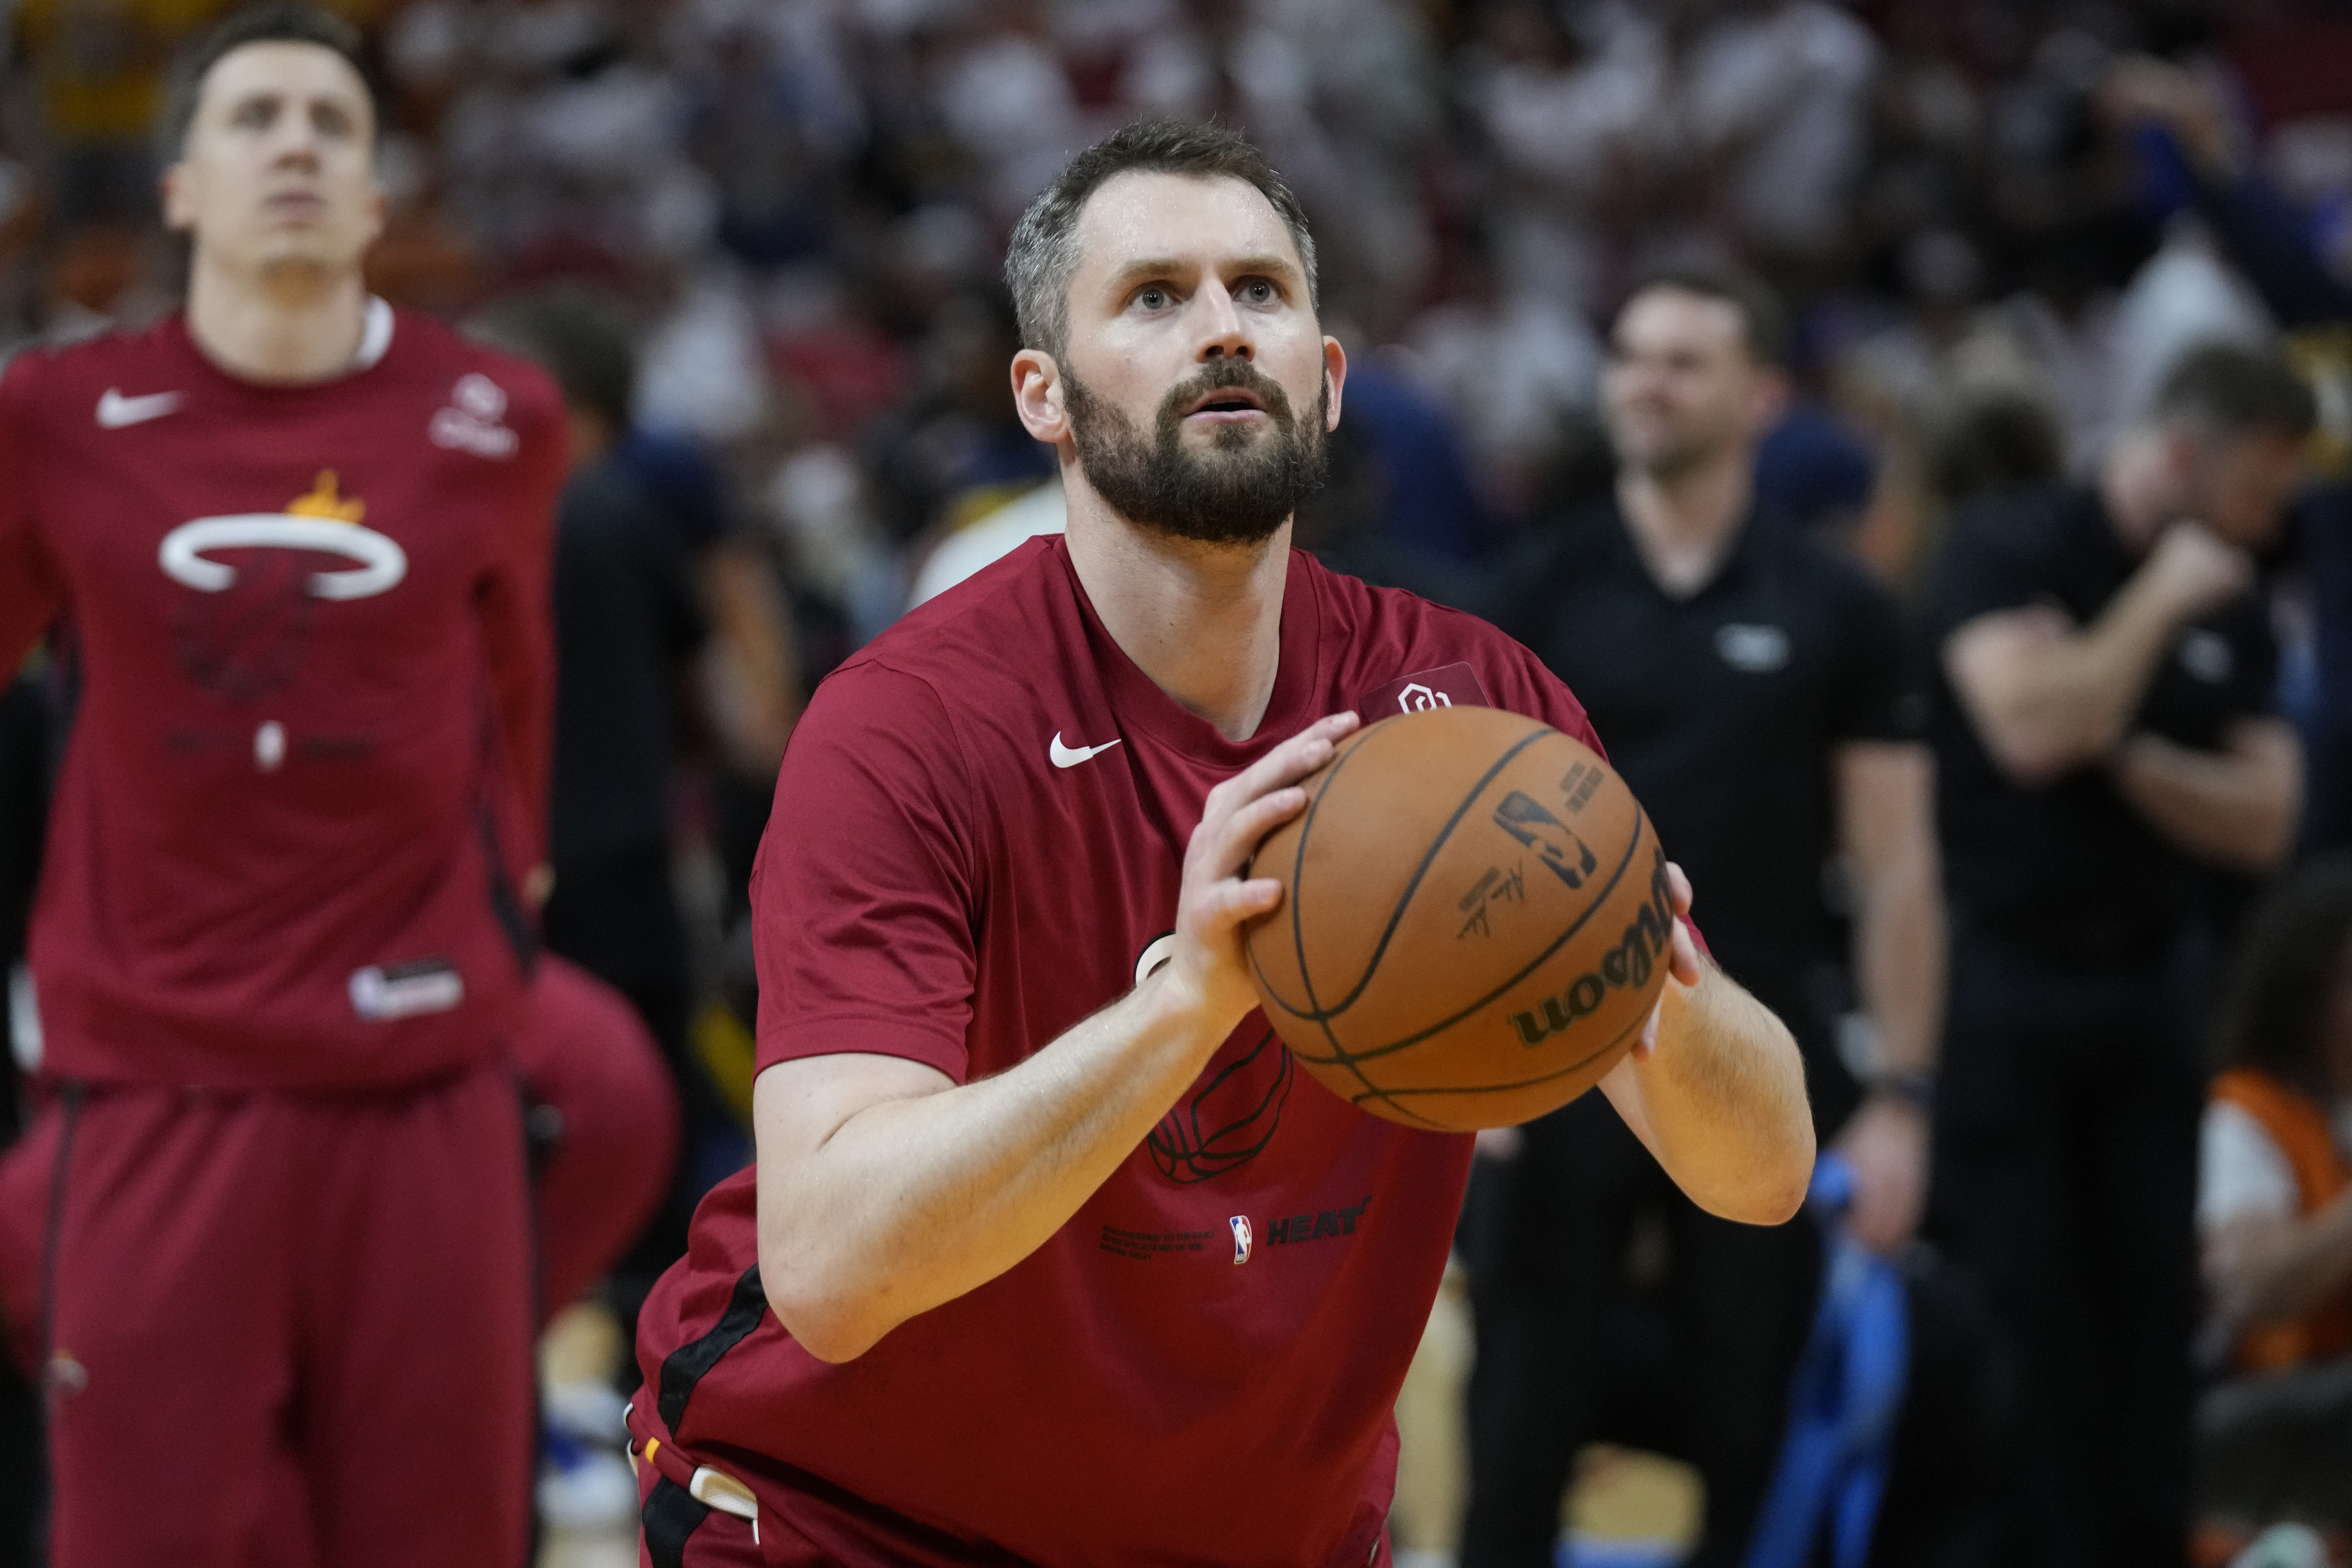 AP source: Kevin Love discussing possible buyout from Cavs - The